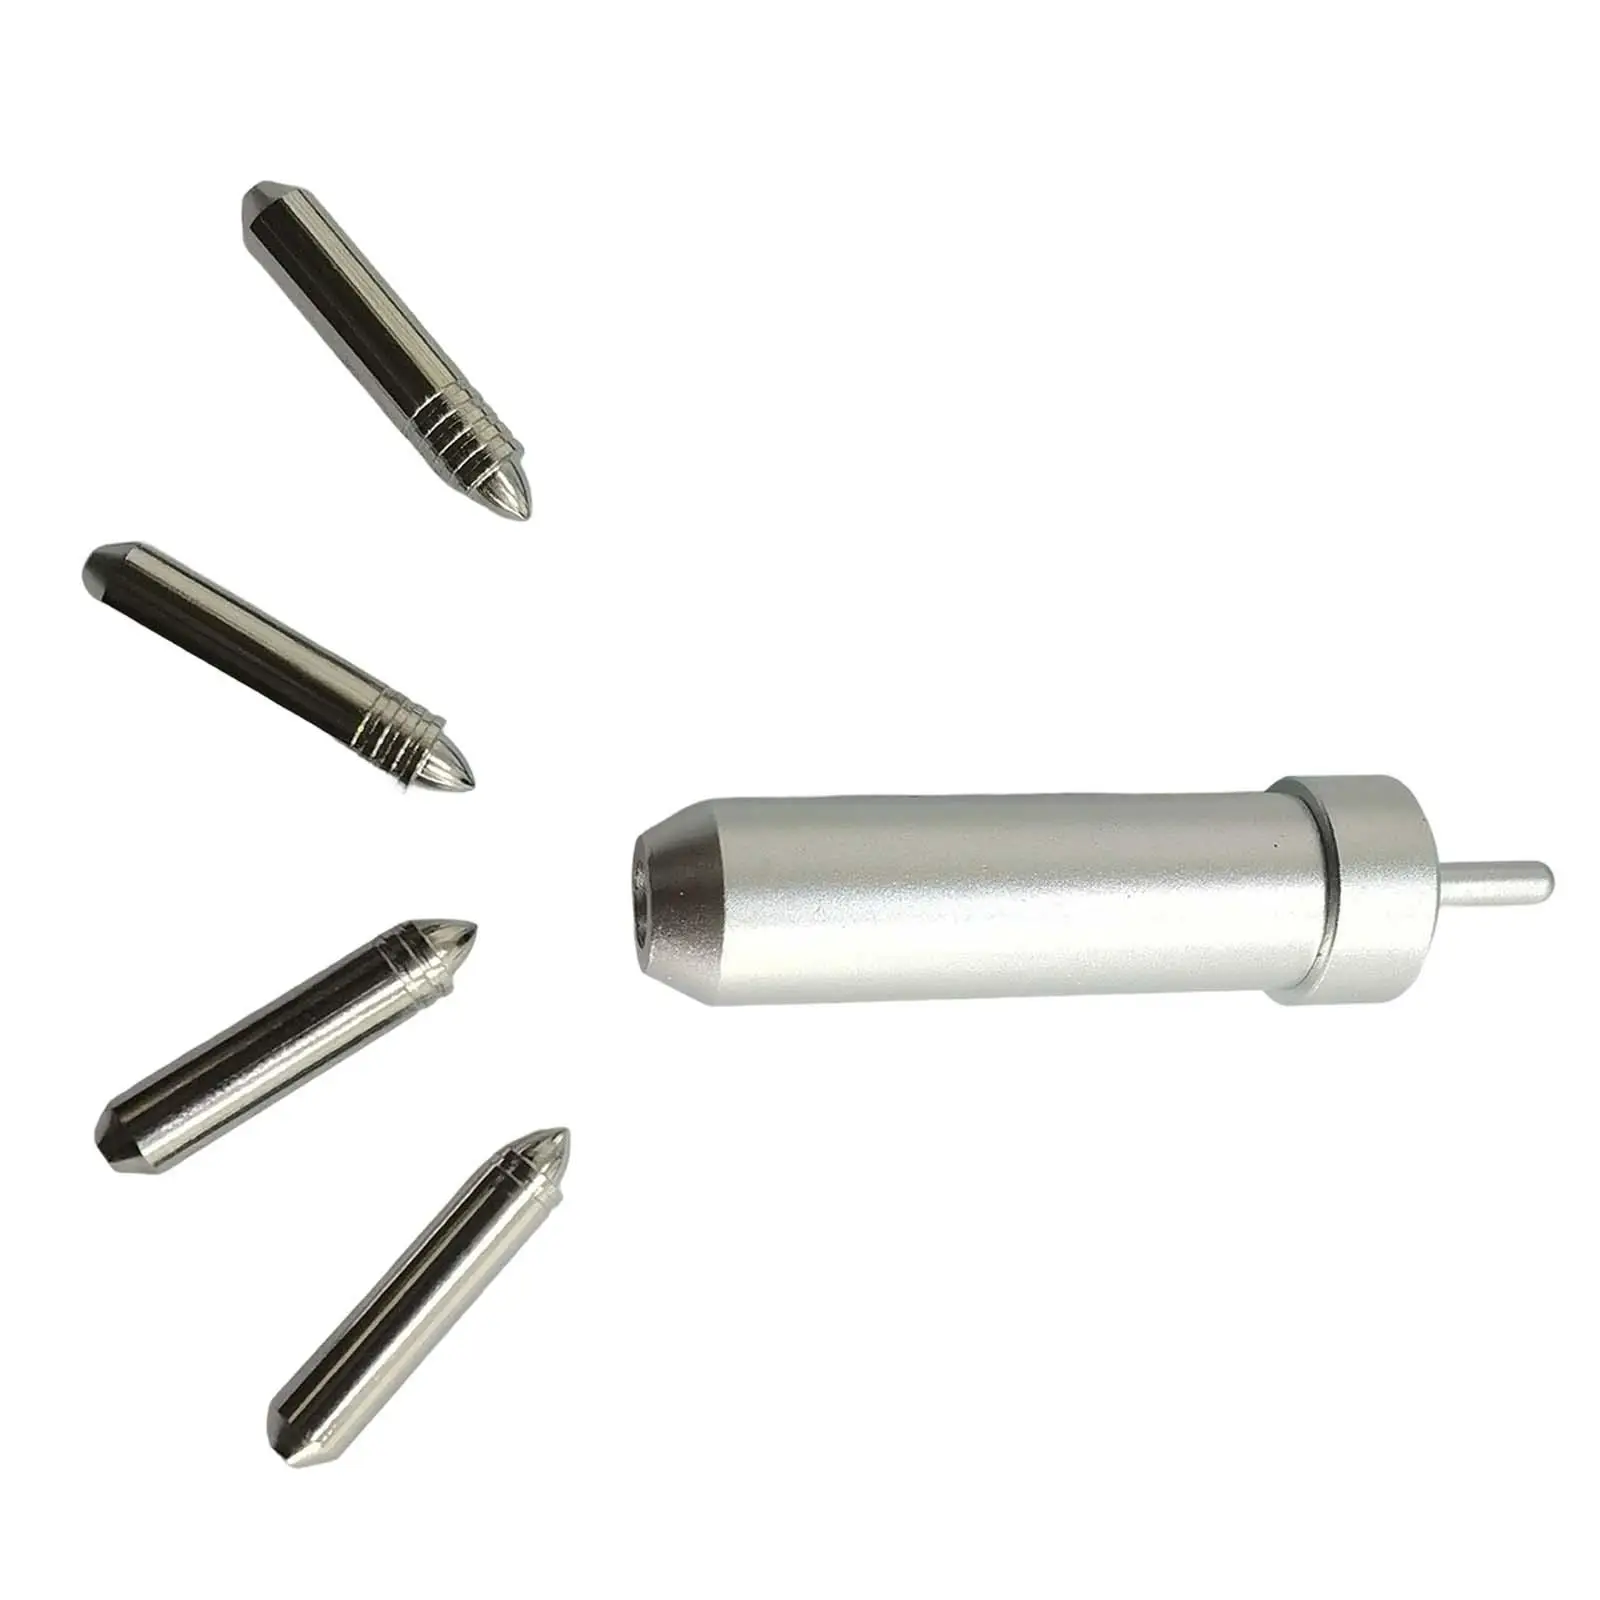 Cut Blade and Housing Replace Foil Transfer Tool for Die Cutting Machine Fabric